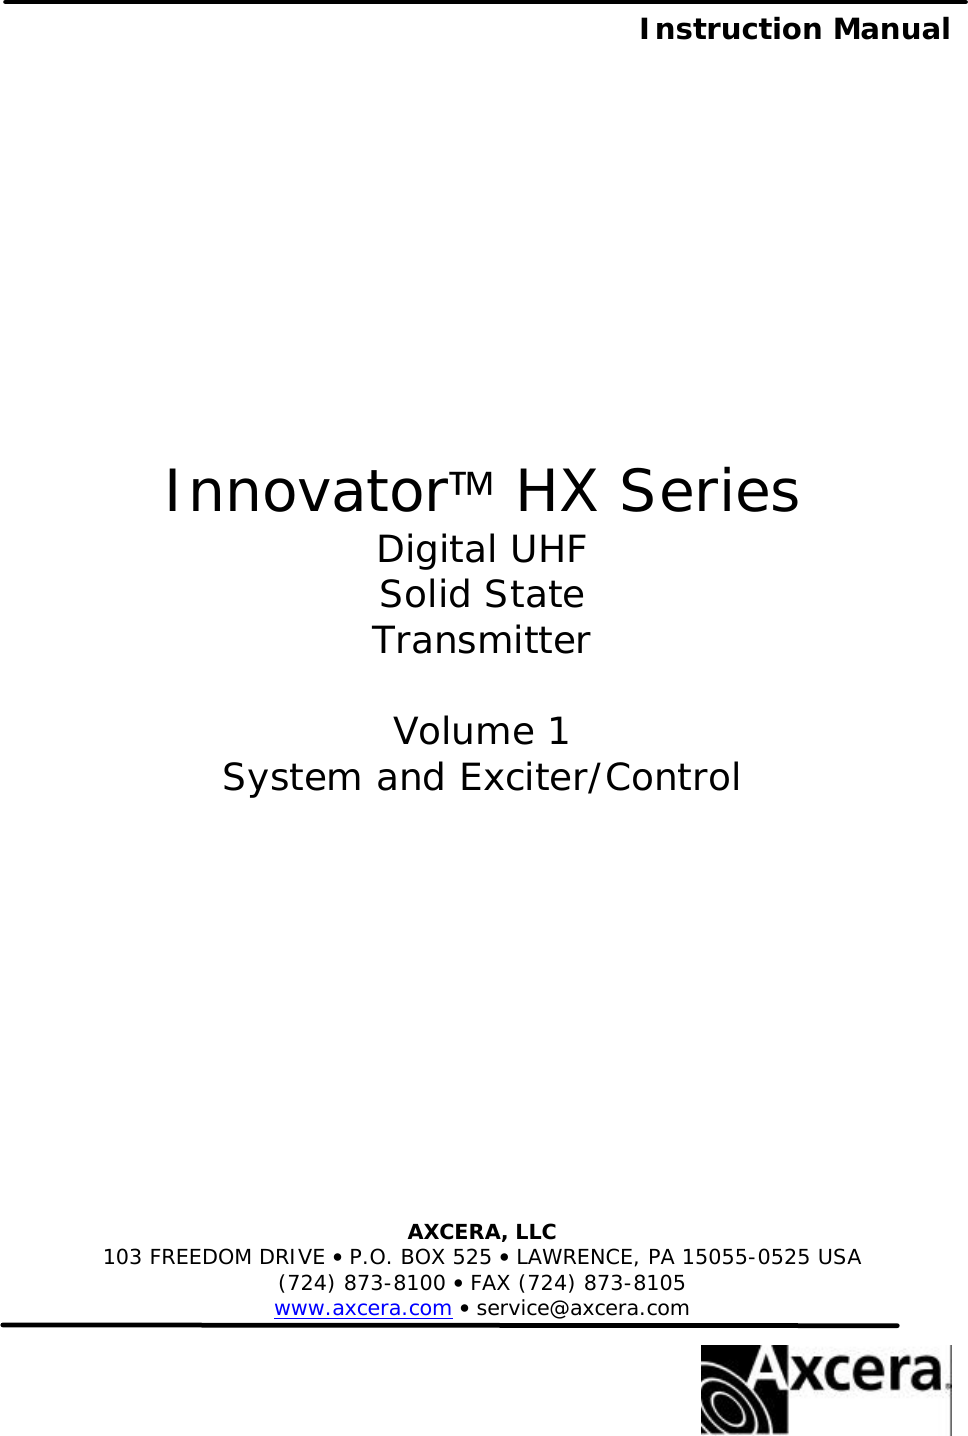  Instruction Manual                  Innovator HX Series Digital UHF Solid State Transmitter  Volume 1 System and Exciter/Control             AXCERA, LLC 103 FREEDOM DRIVE • P.O. BOX 525 • LAWRENCE, PA 15055-0525 USA (724) 873-8100 • FAX (724) 873-8105 www.axcera.com • service@axcera.com   